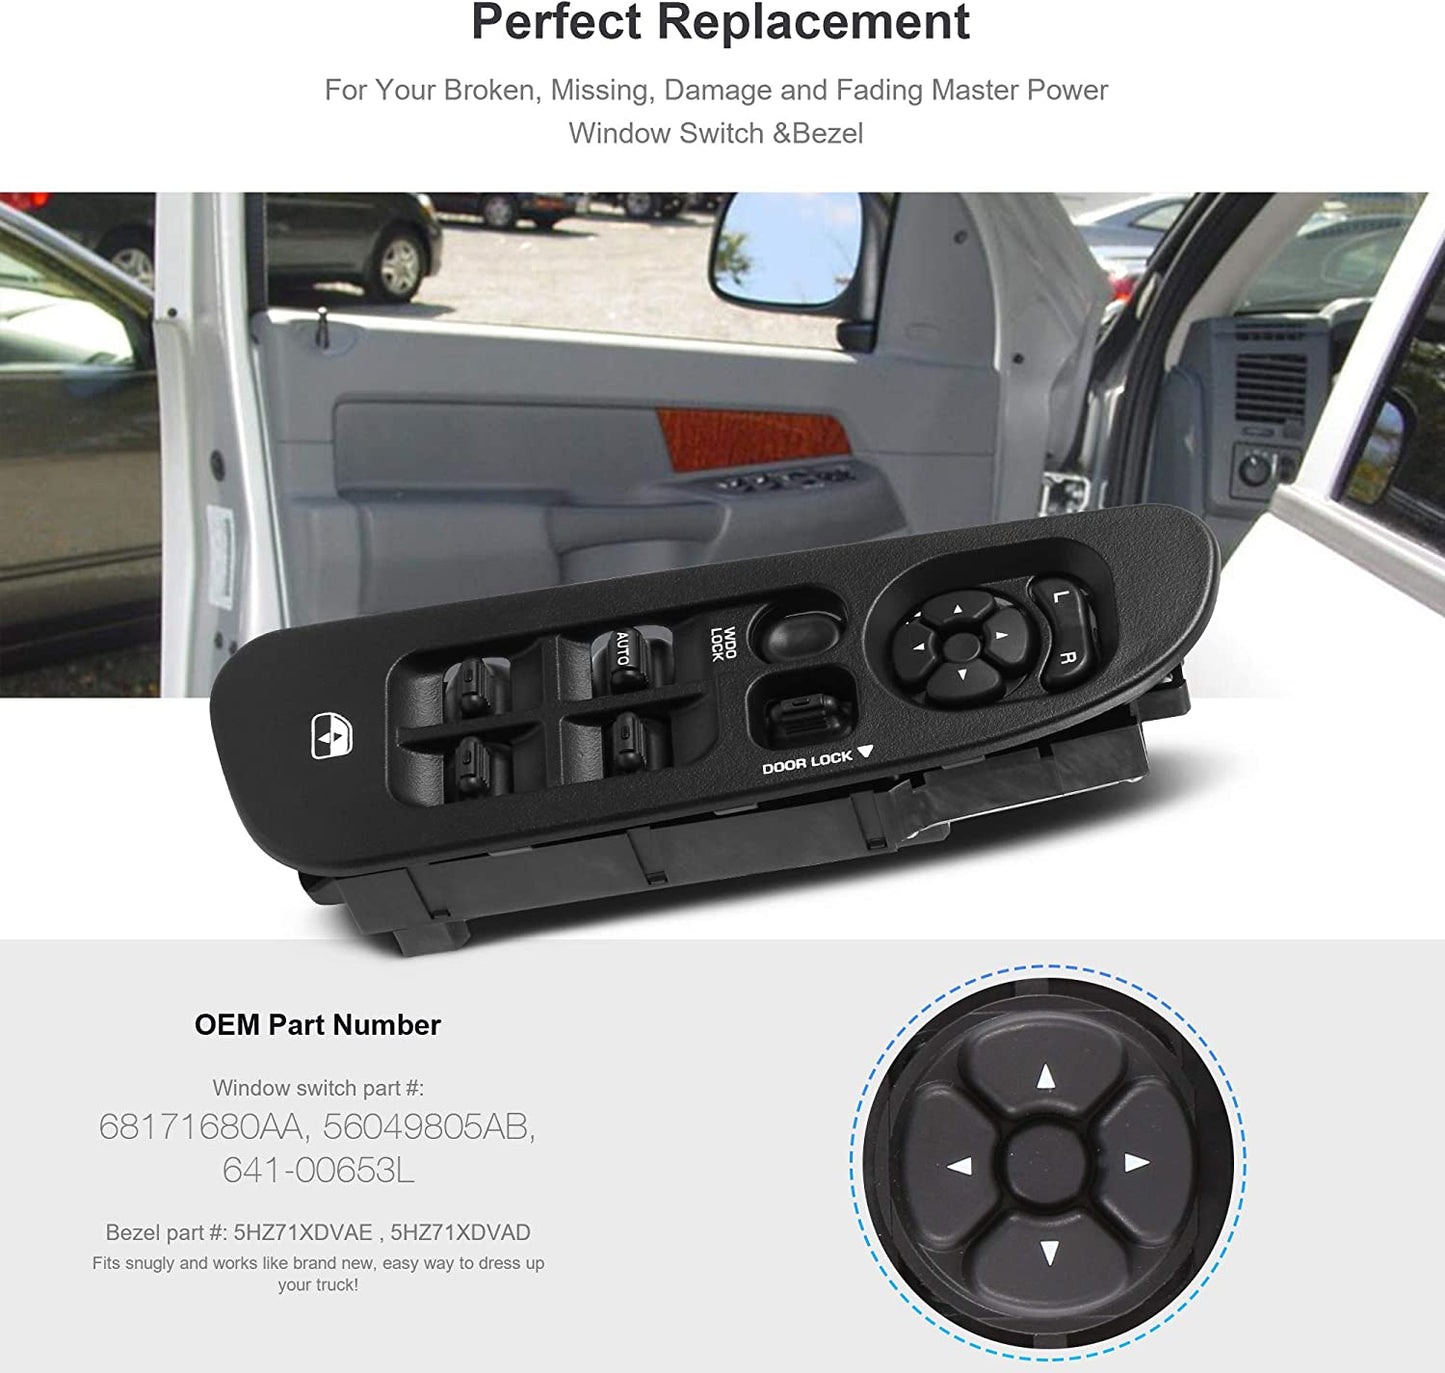 Power Window Switch and Bezel Replacements for 2002-2010 Dodge Ram 1500/2500/3500